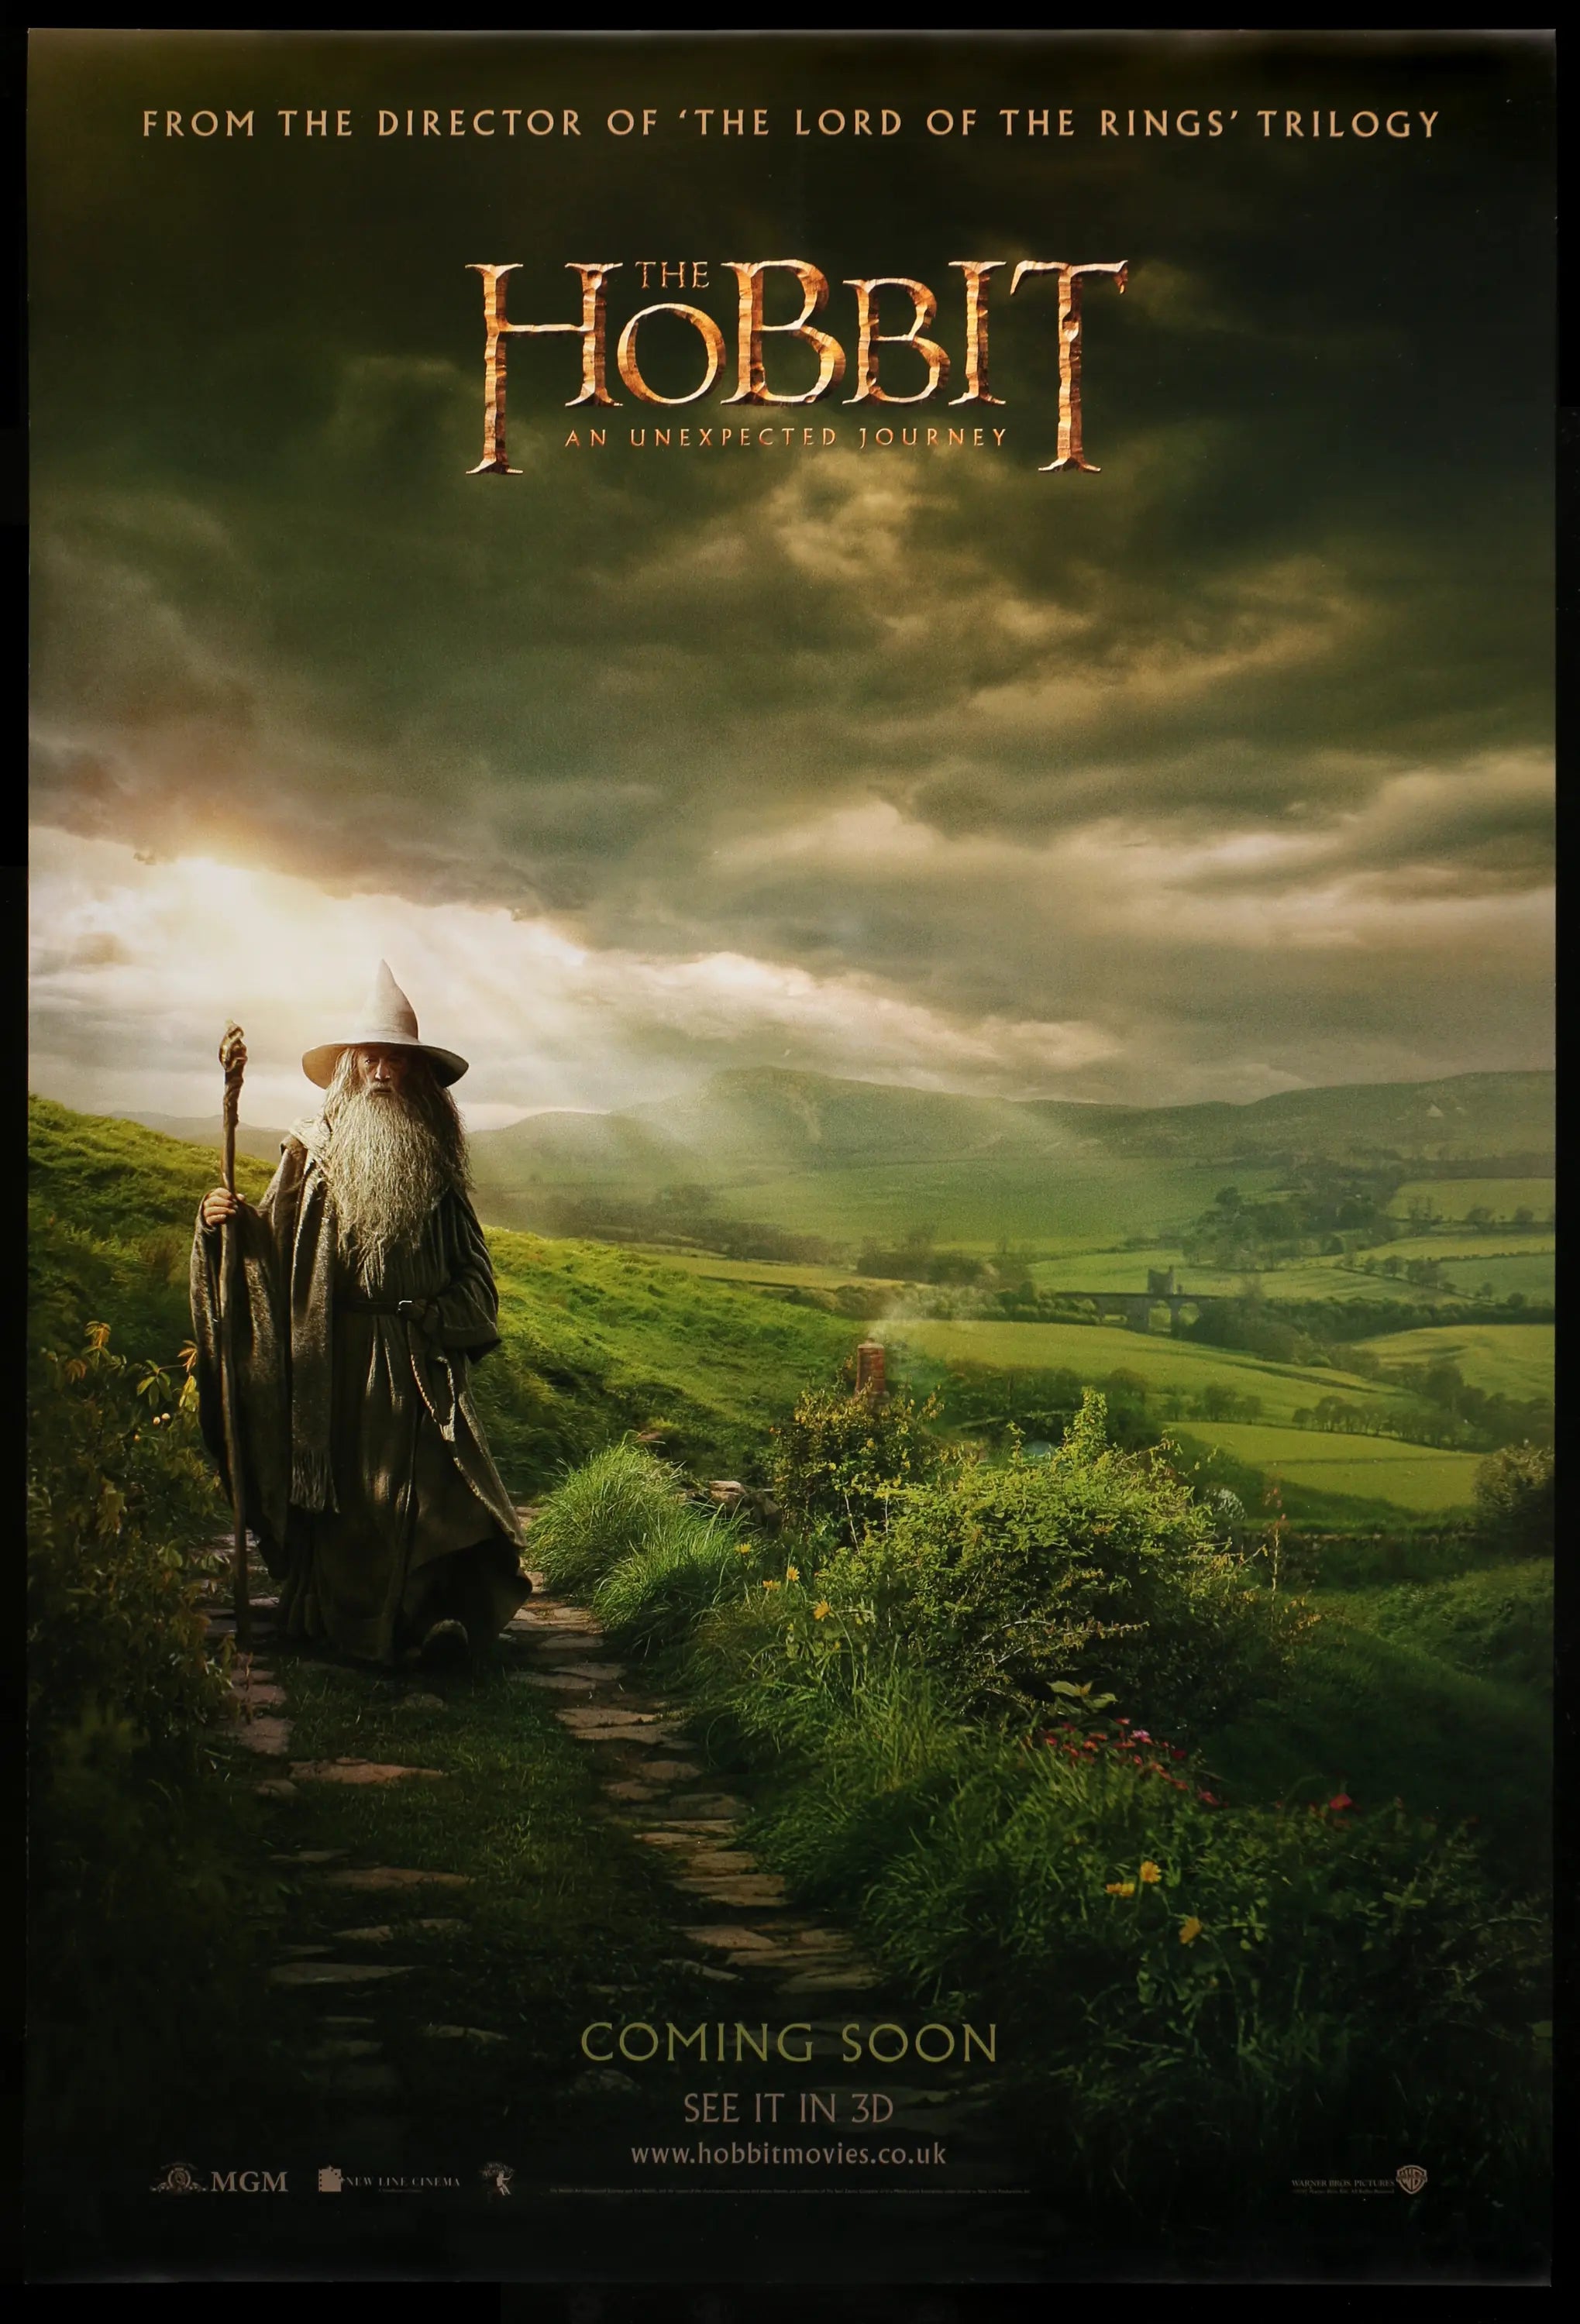 Original　Hobbit　One-Sheet　Movie　Vintage　Art　Movie　Film　Unexpected　Posters　English　An　(2012)　Journey　The　Poster